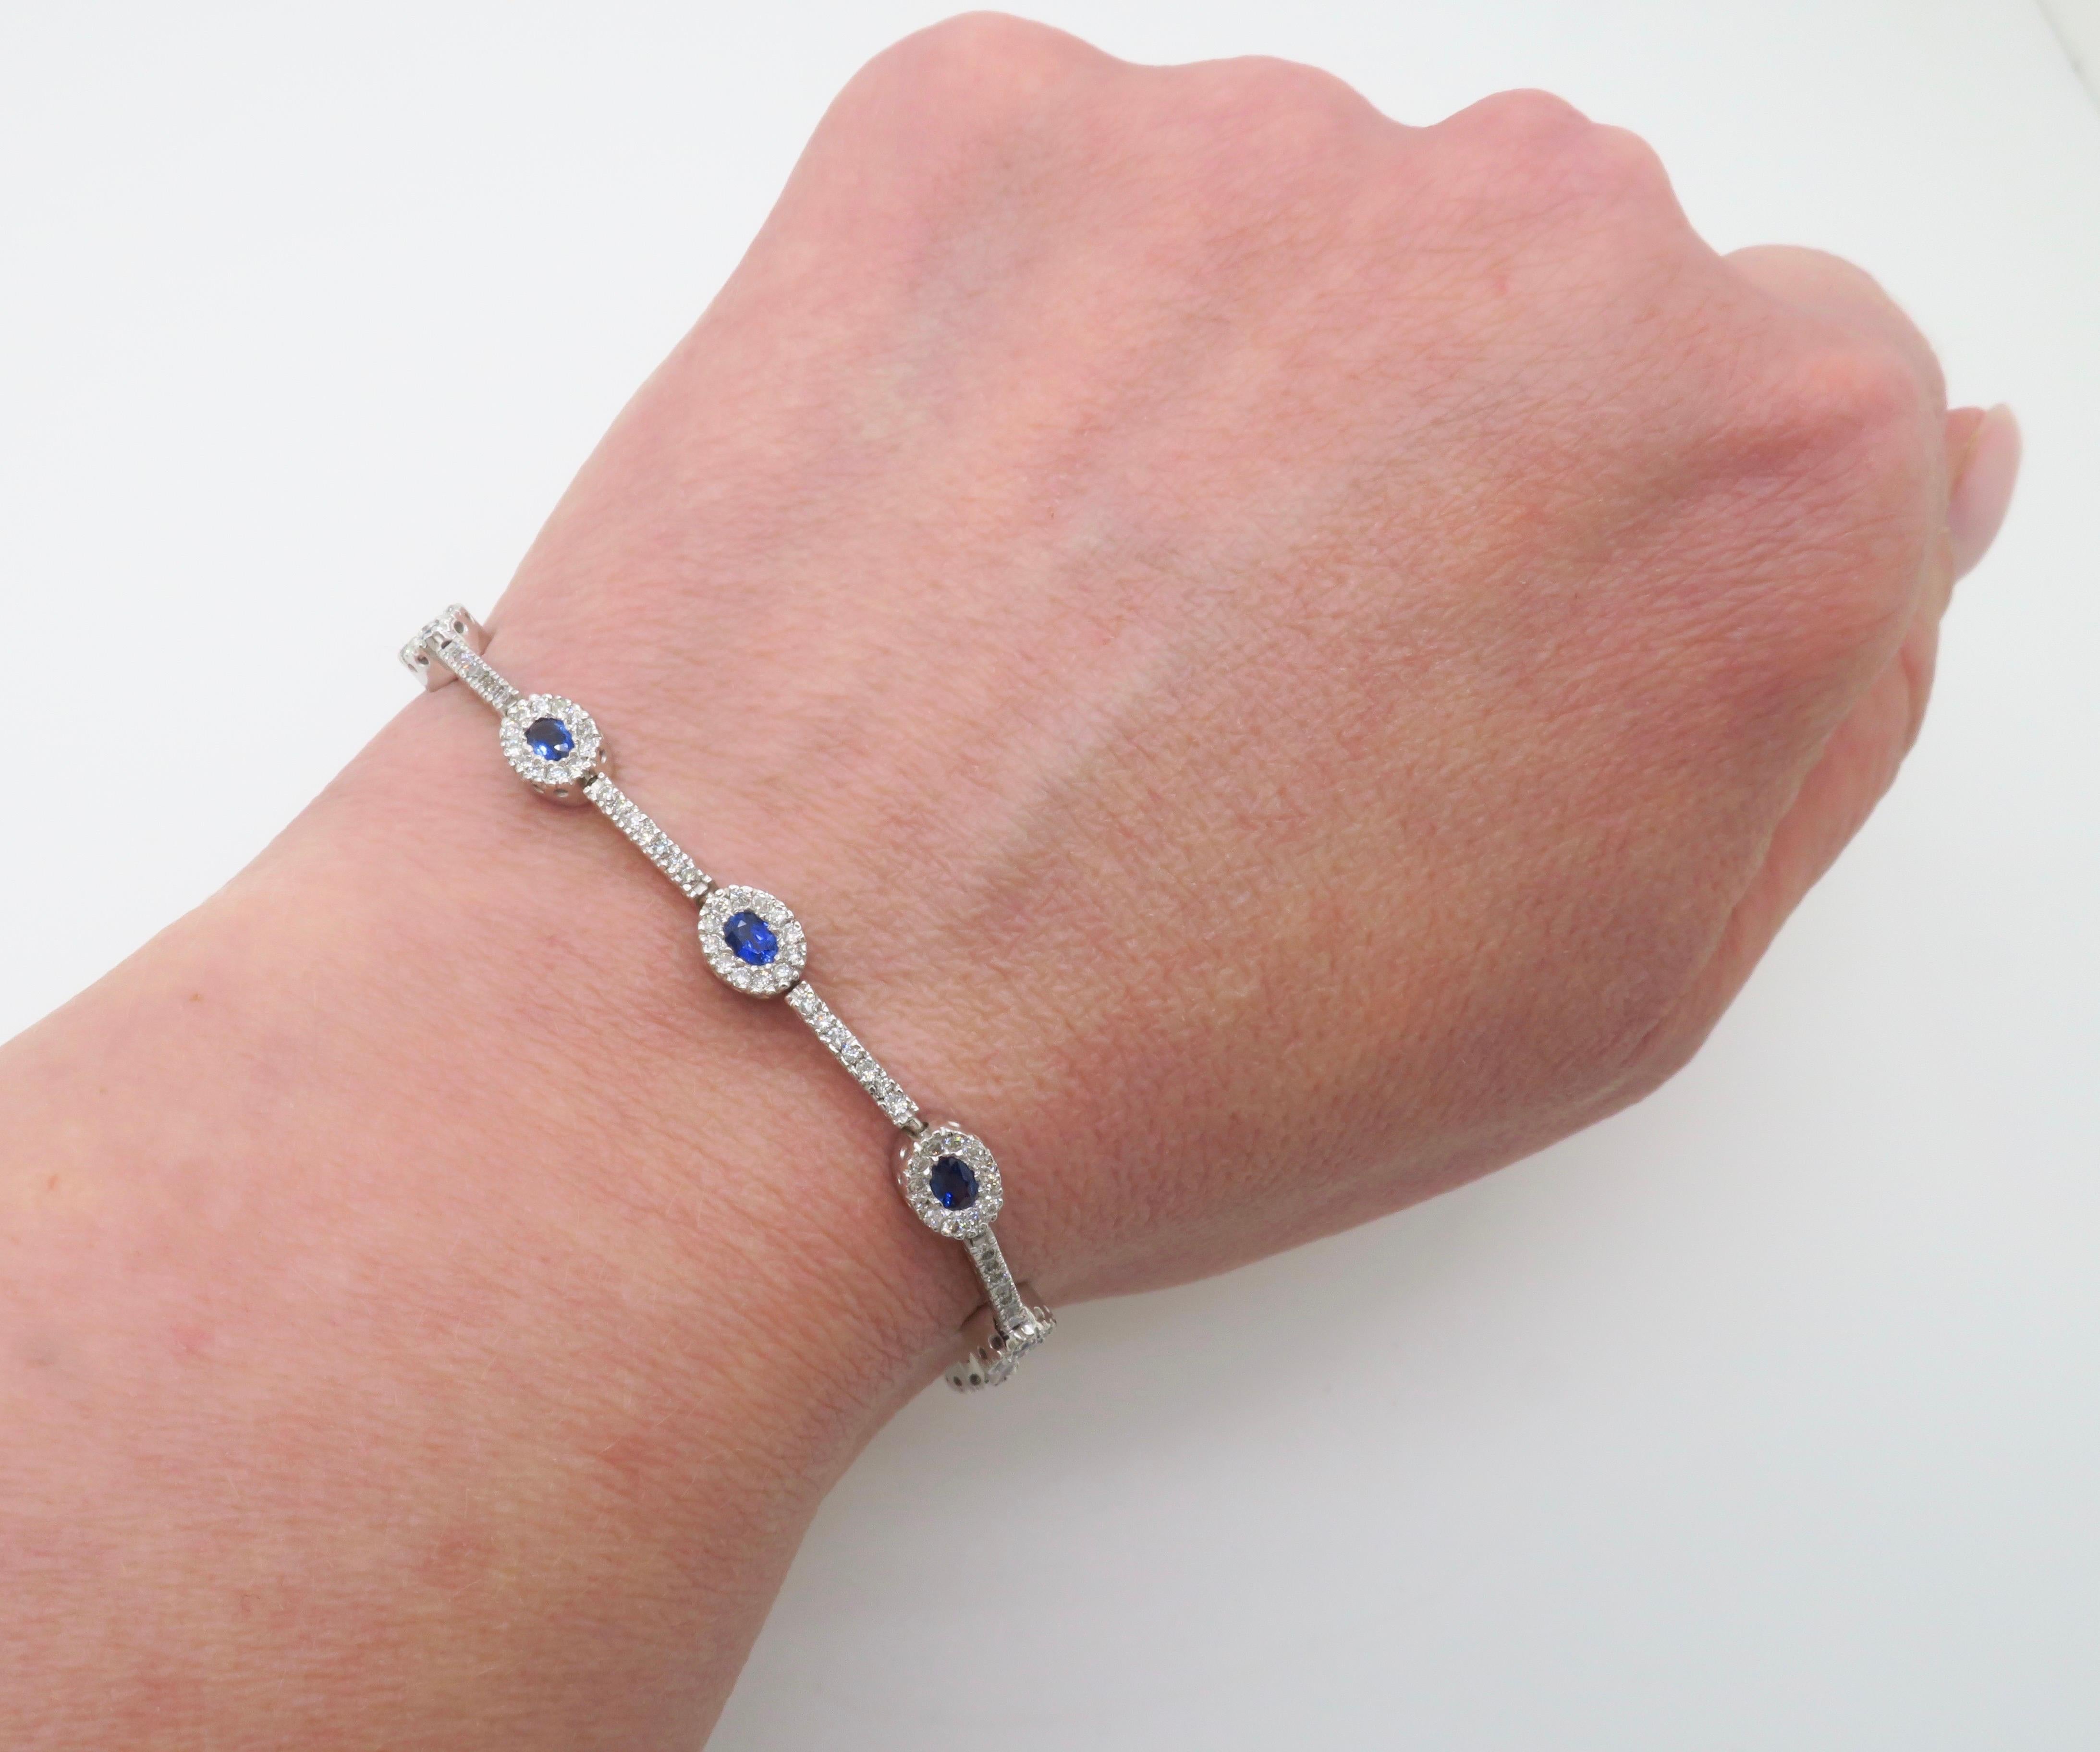 Blue Sapphire and Diamond Halo bracelet made in 14k white gold. 

Diamond Carat Weight: 2.04CTW
Diamond Cut: Round Brilliant Cut 
Color: F-H
Clarity: VS-SI
Blue Sapphire Carat Weight: 2.50CTW 
Metal: 14K White Gold
Marked/Tested: Stamped 